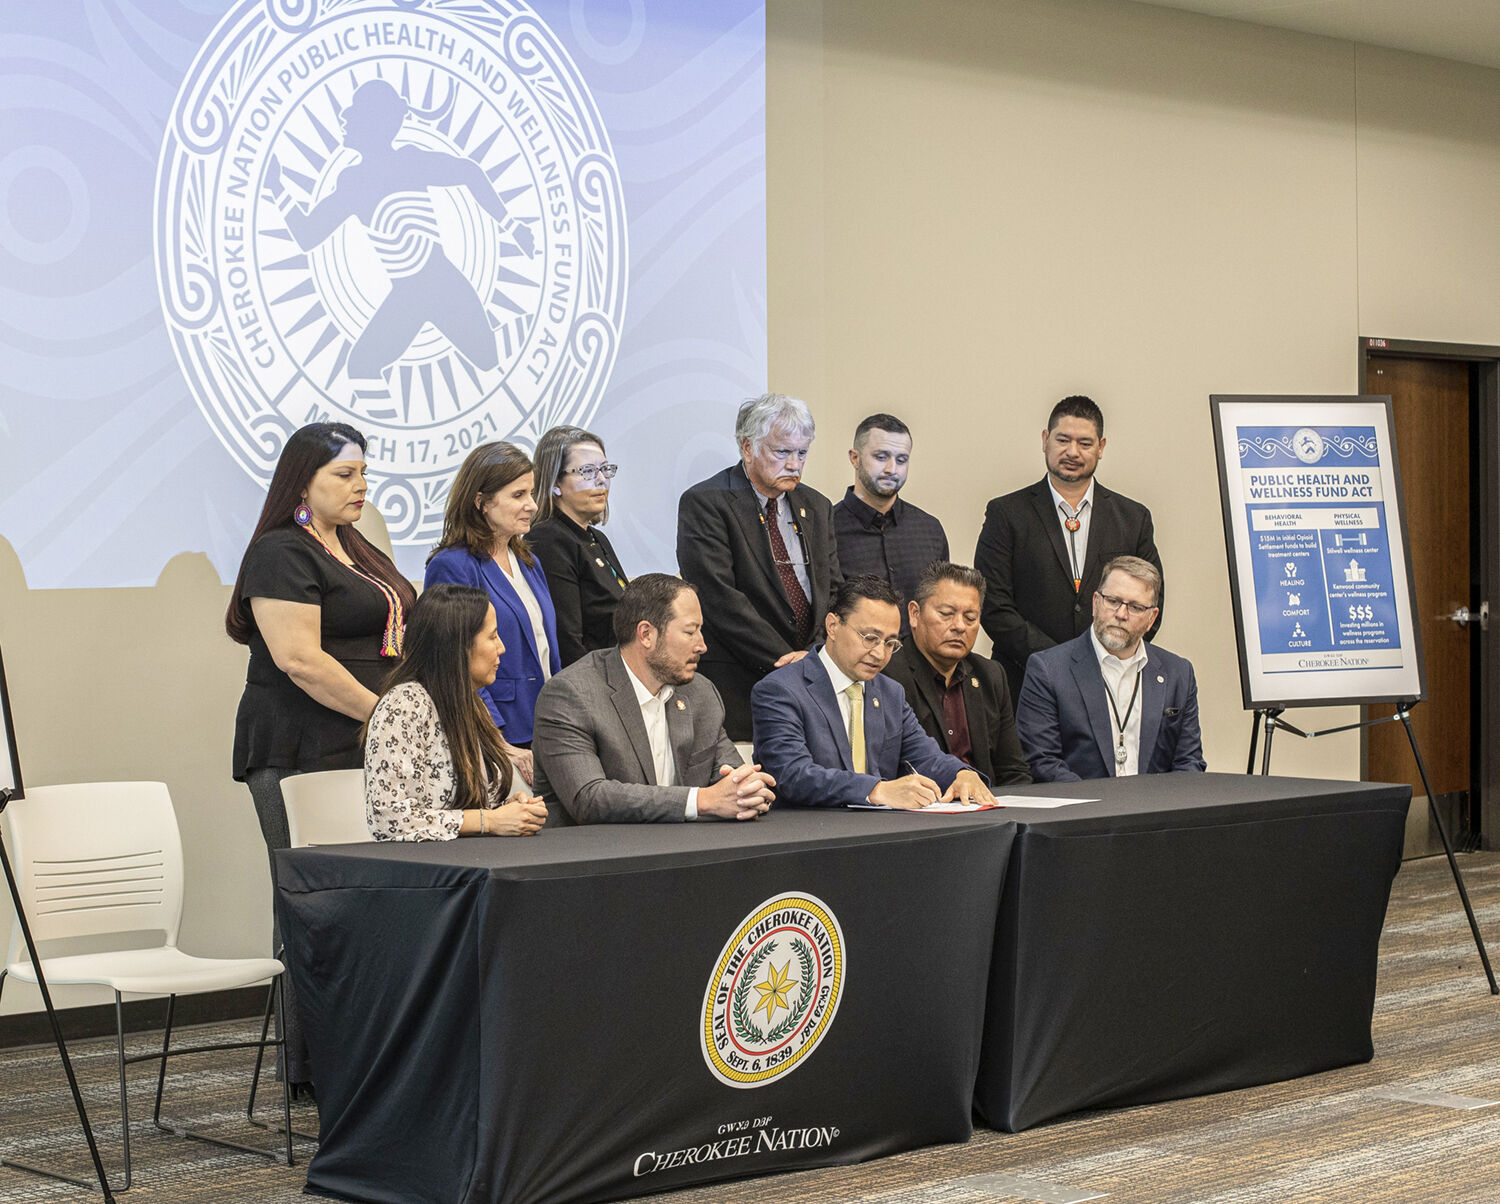 Cherokee leaders sign revised Public Health, Wellness Act to build drug treatment facilities